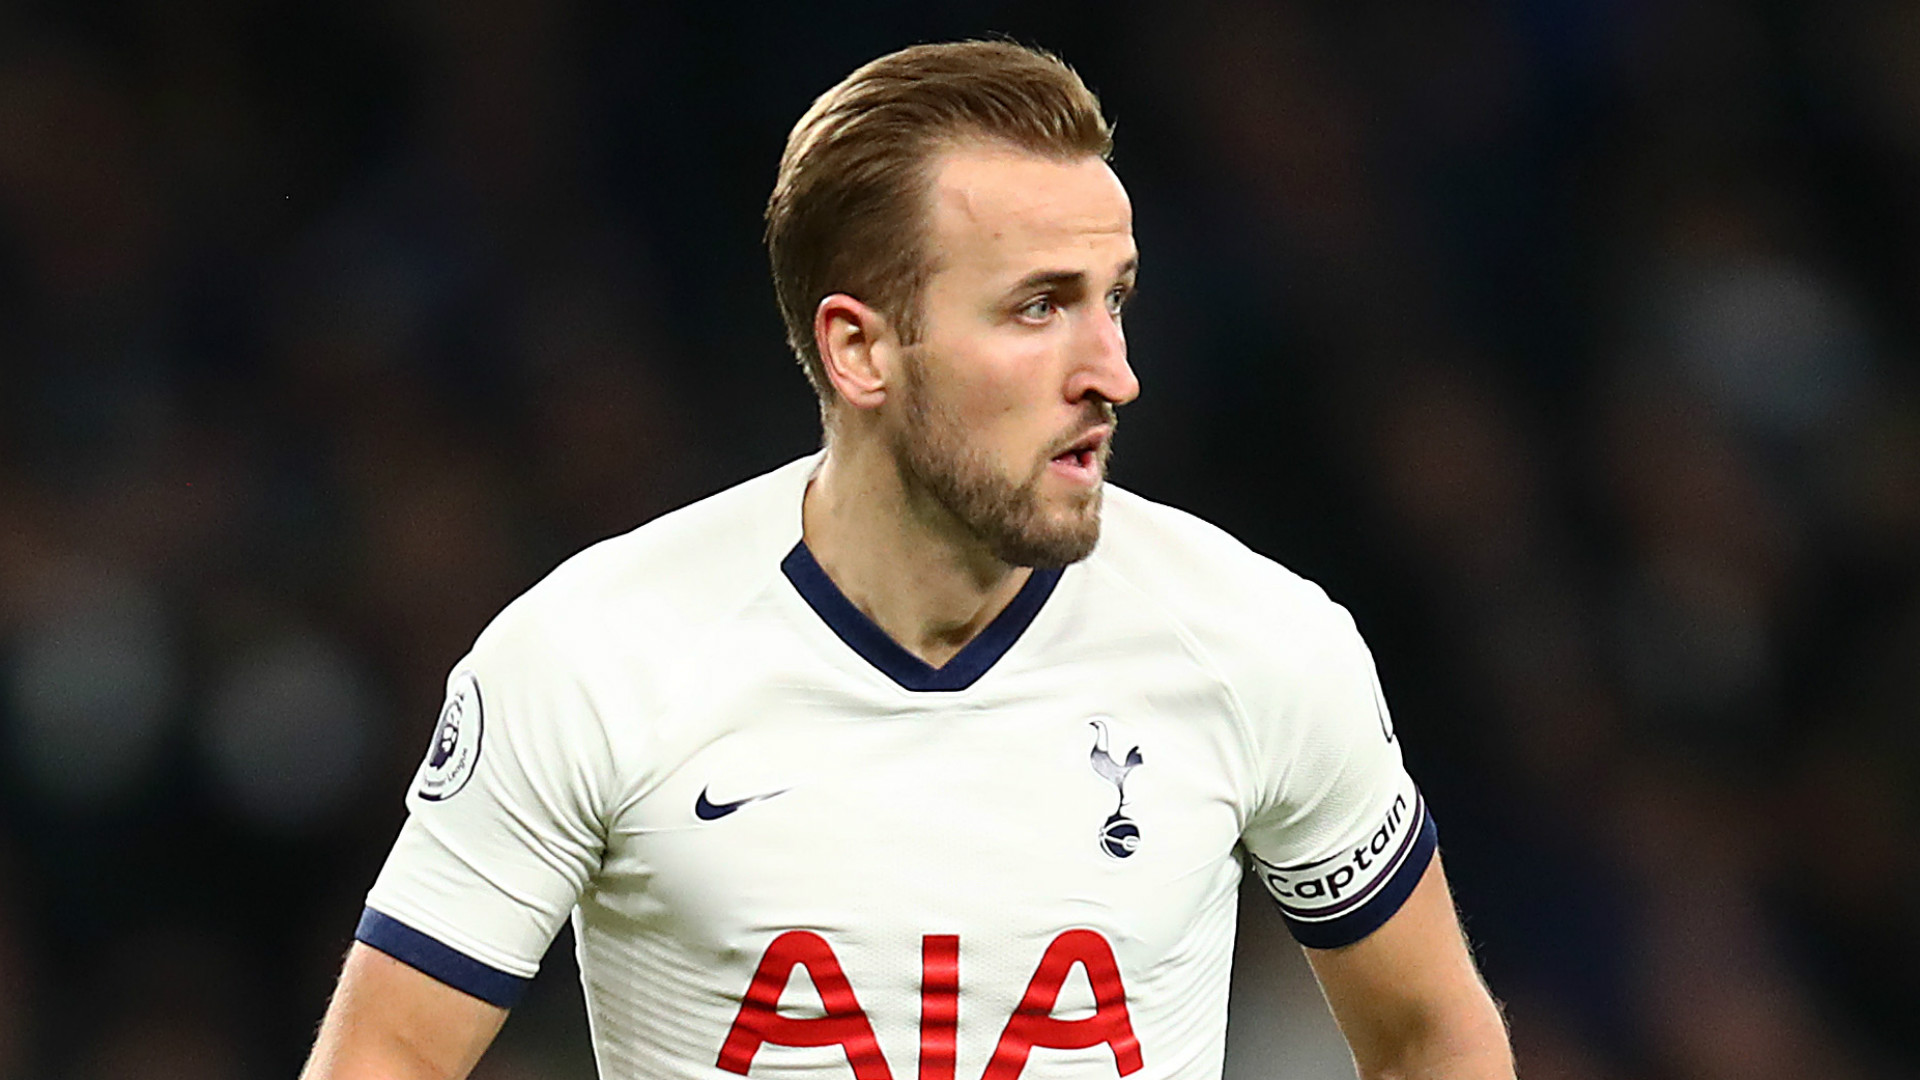 Transfer news and rumours LIVE: Tottenham confident of keeping £200m Kane